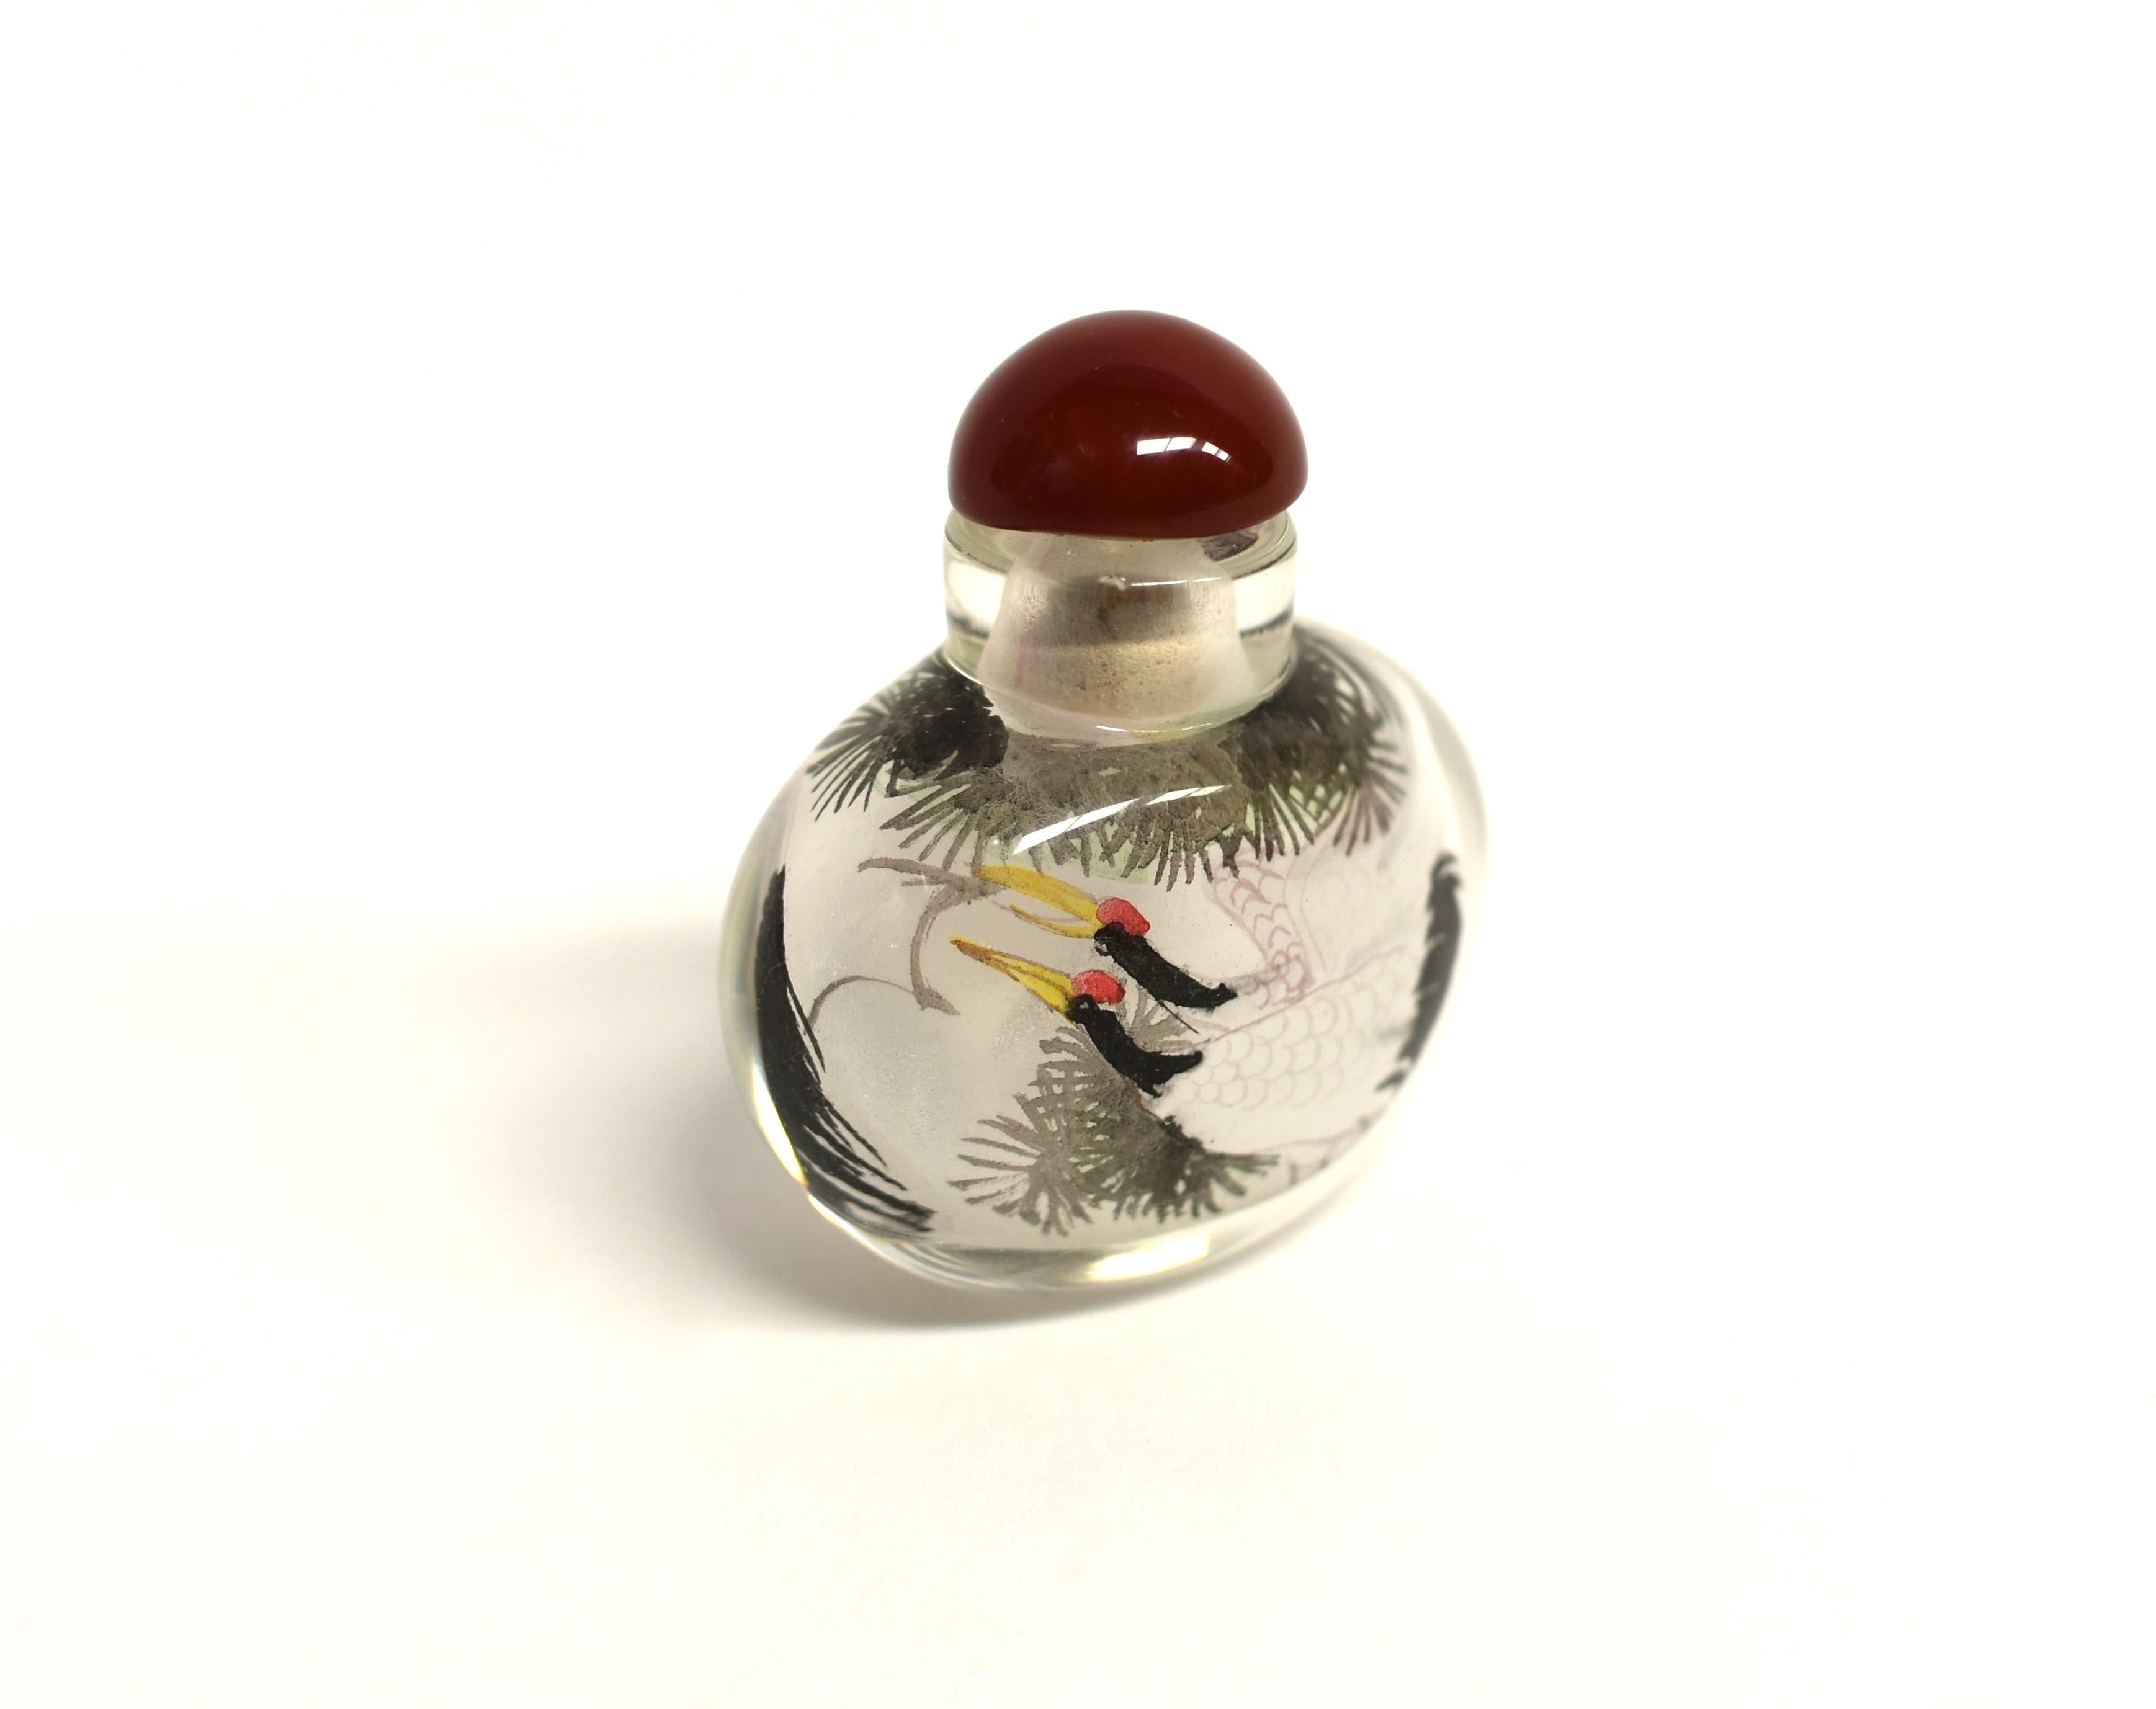 Our snuff bottles are topped with gemstone grade agate lids and 100% hand painted from within. The Chinese art of églomisé uses a very thin bamboo brush with a few strands of hair to apply watercolor on the inside walls of the blank glass bottle